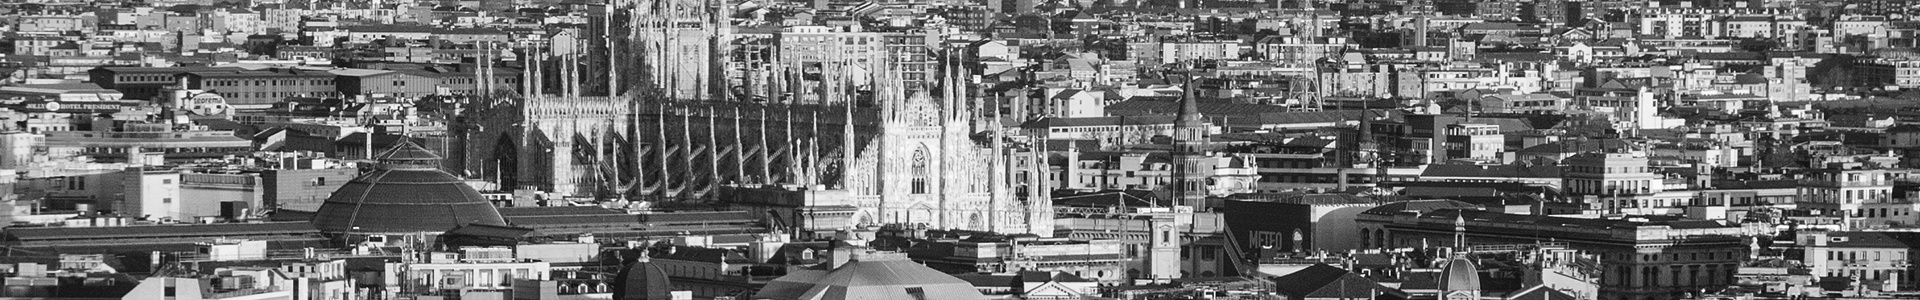 Milan view in black and white